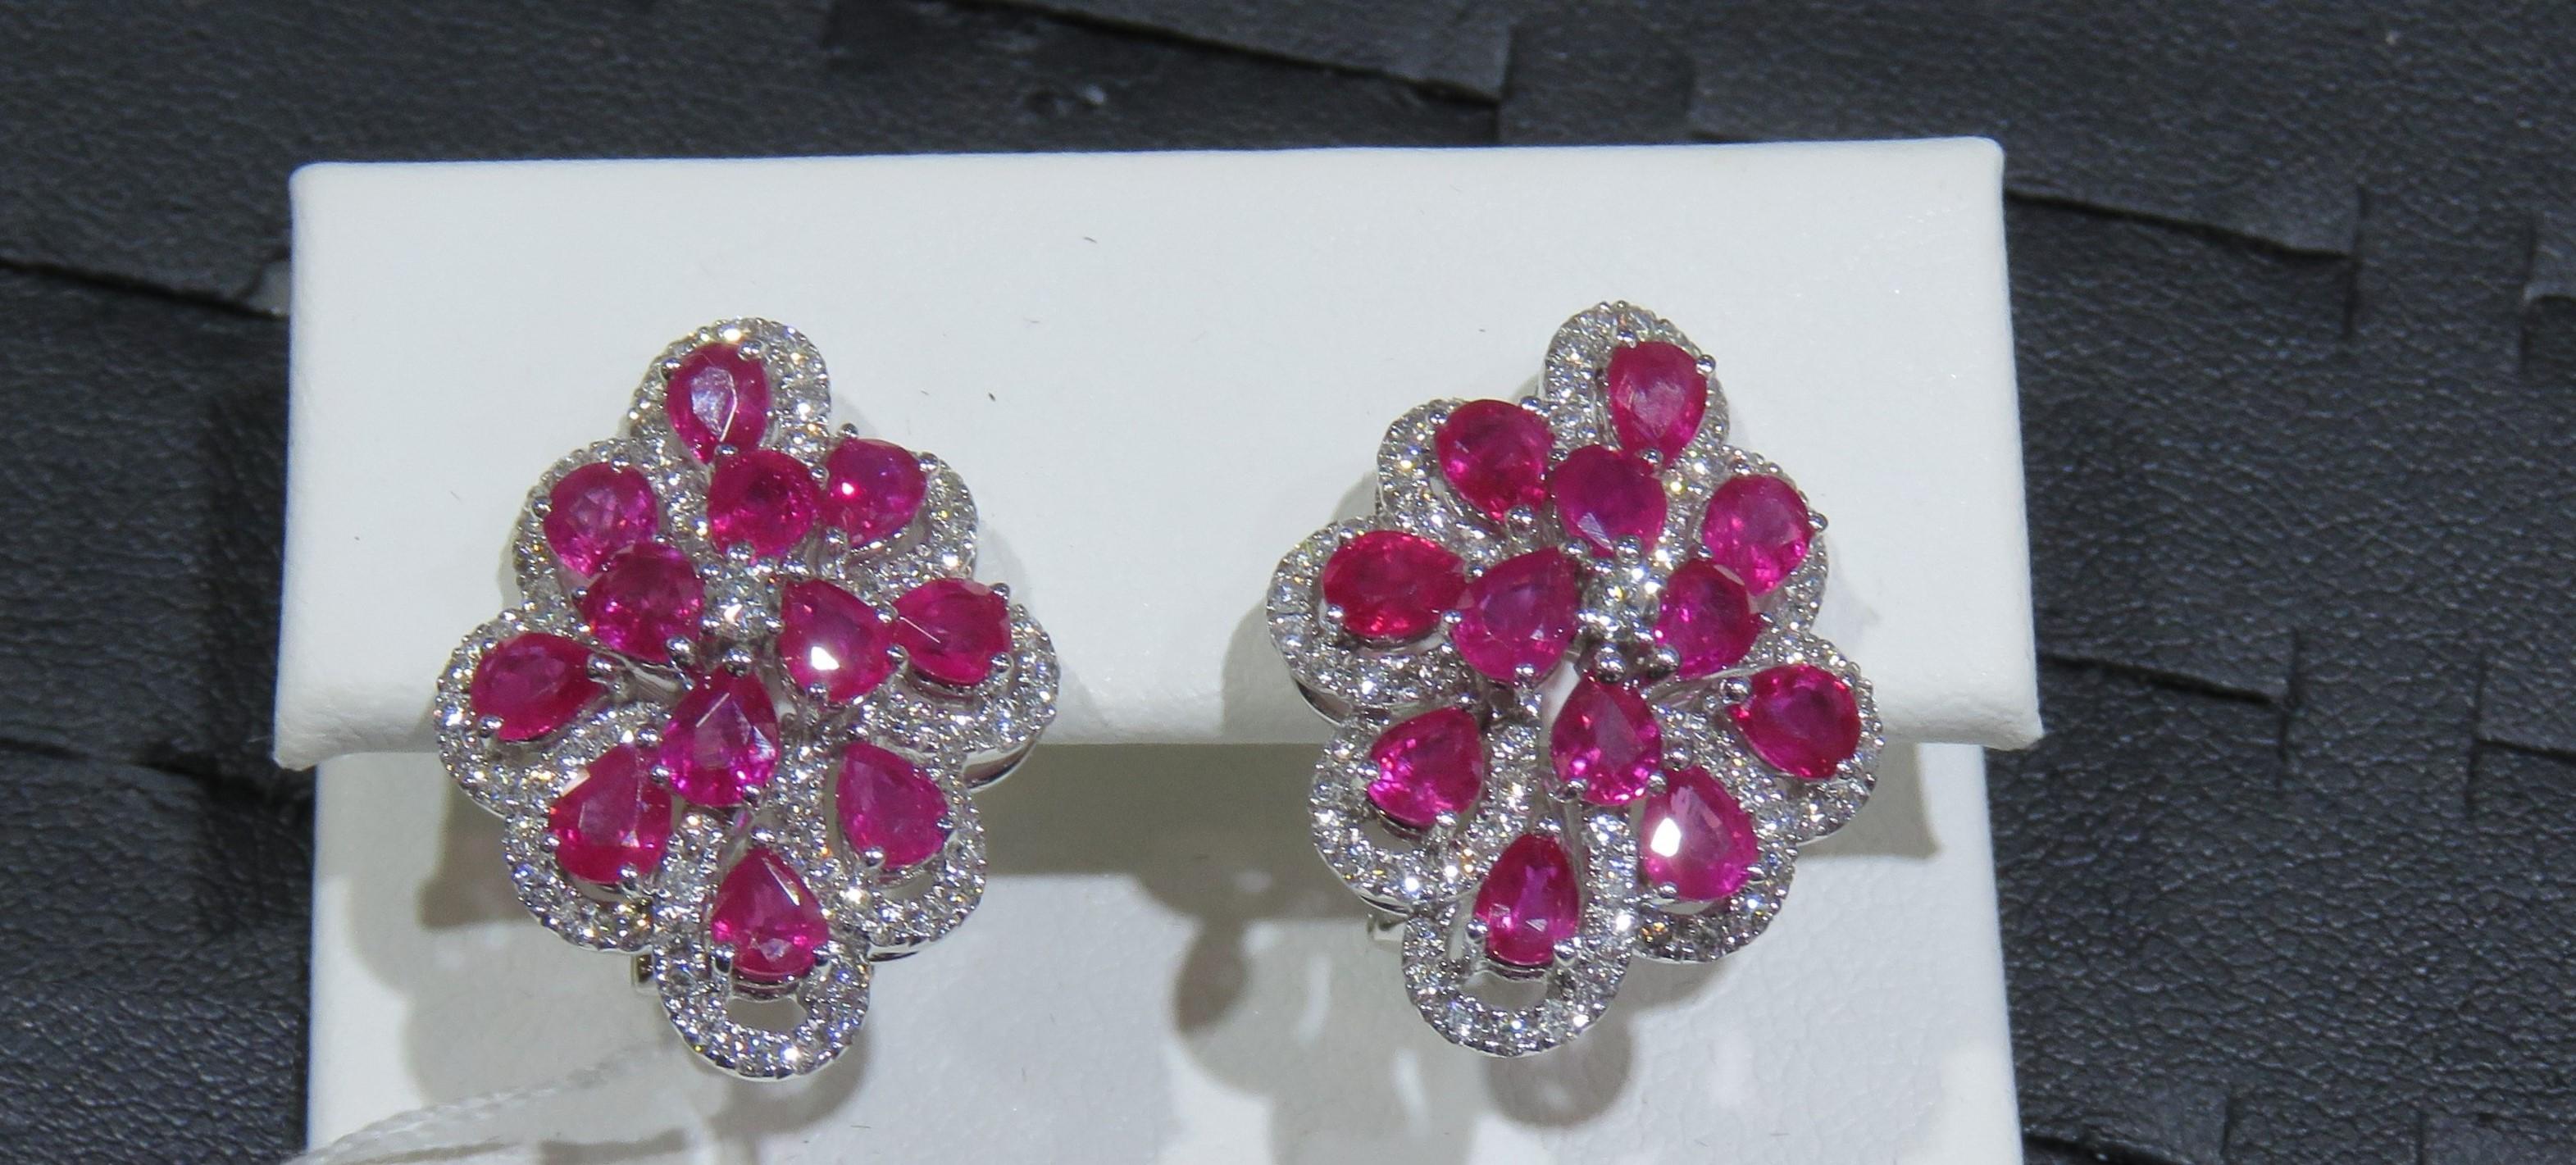 The Following Items we are offering is this Rare Important Radiant 18KT Gold Gorgeous Glittering and Sparkling Magnificent Fancy Ruby Diamond Earrings. Earrings contain approx 7CTS of Beautiful Fancy Rubies and Diamonds!!! Stones are Very Clean and